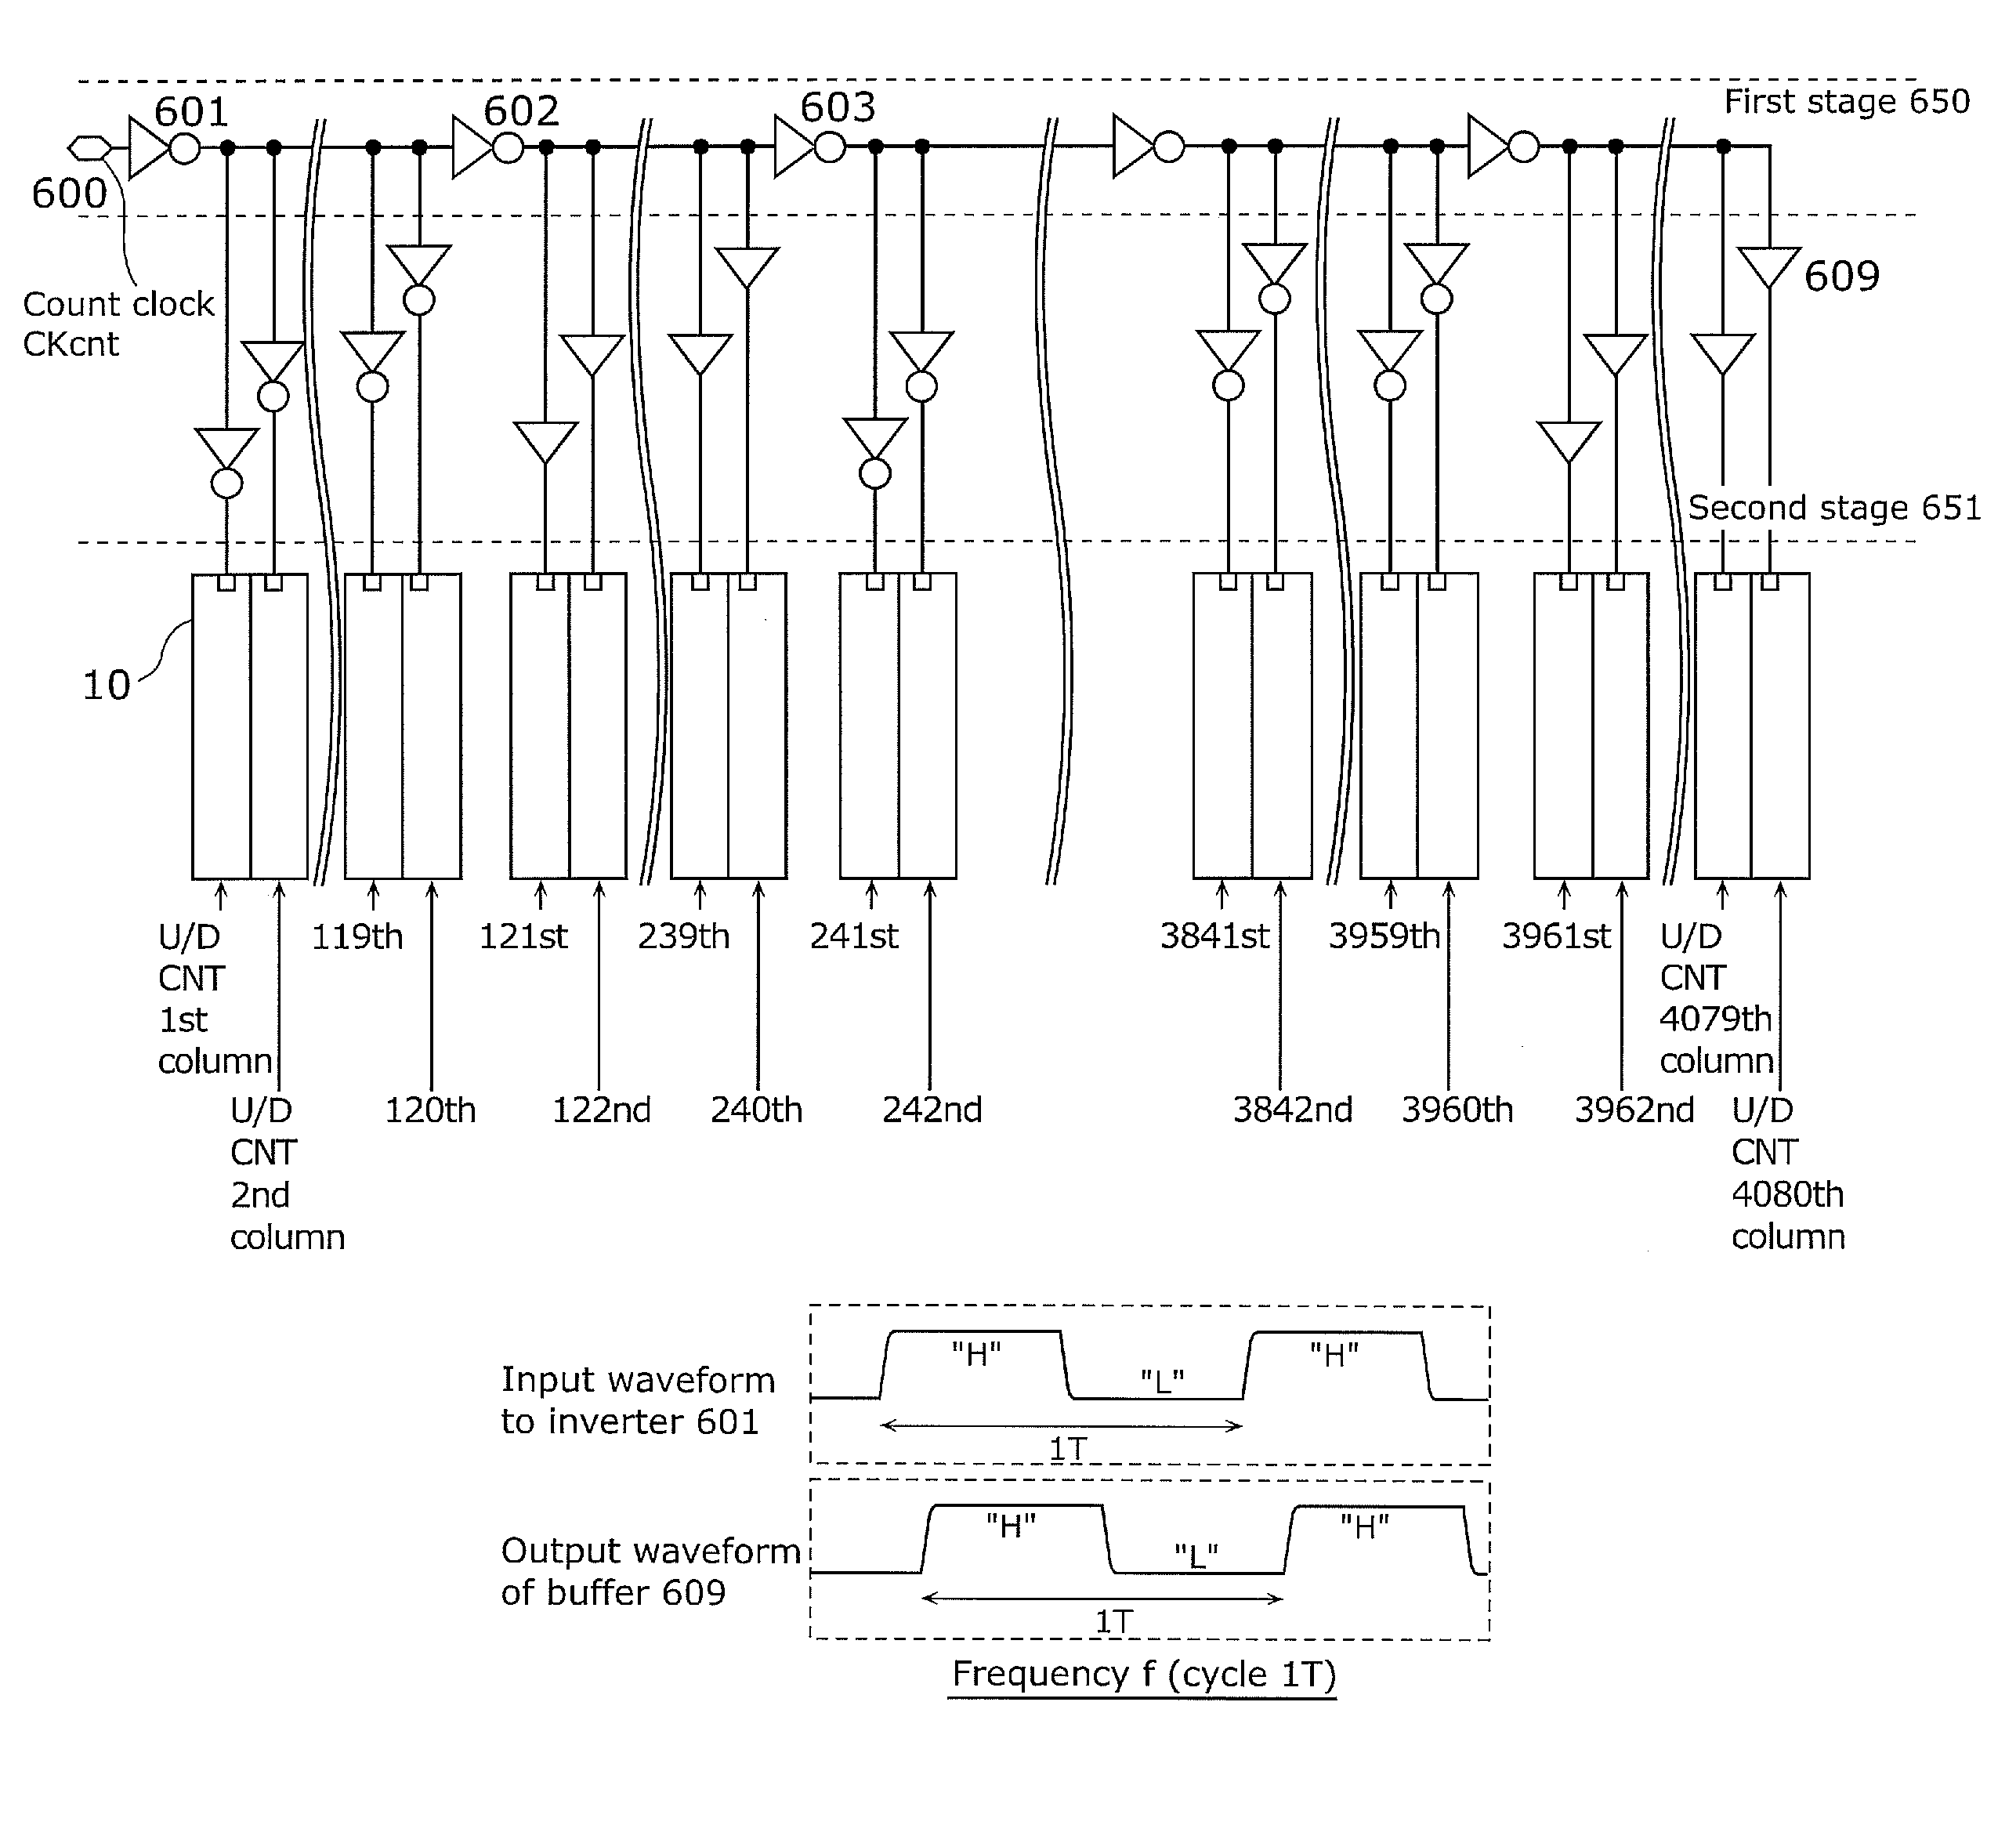 Solid-state imaging device comprising an analog to digital converter with column comparison circuits, column counter circuits, first and second inverters, and buffers